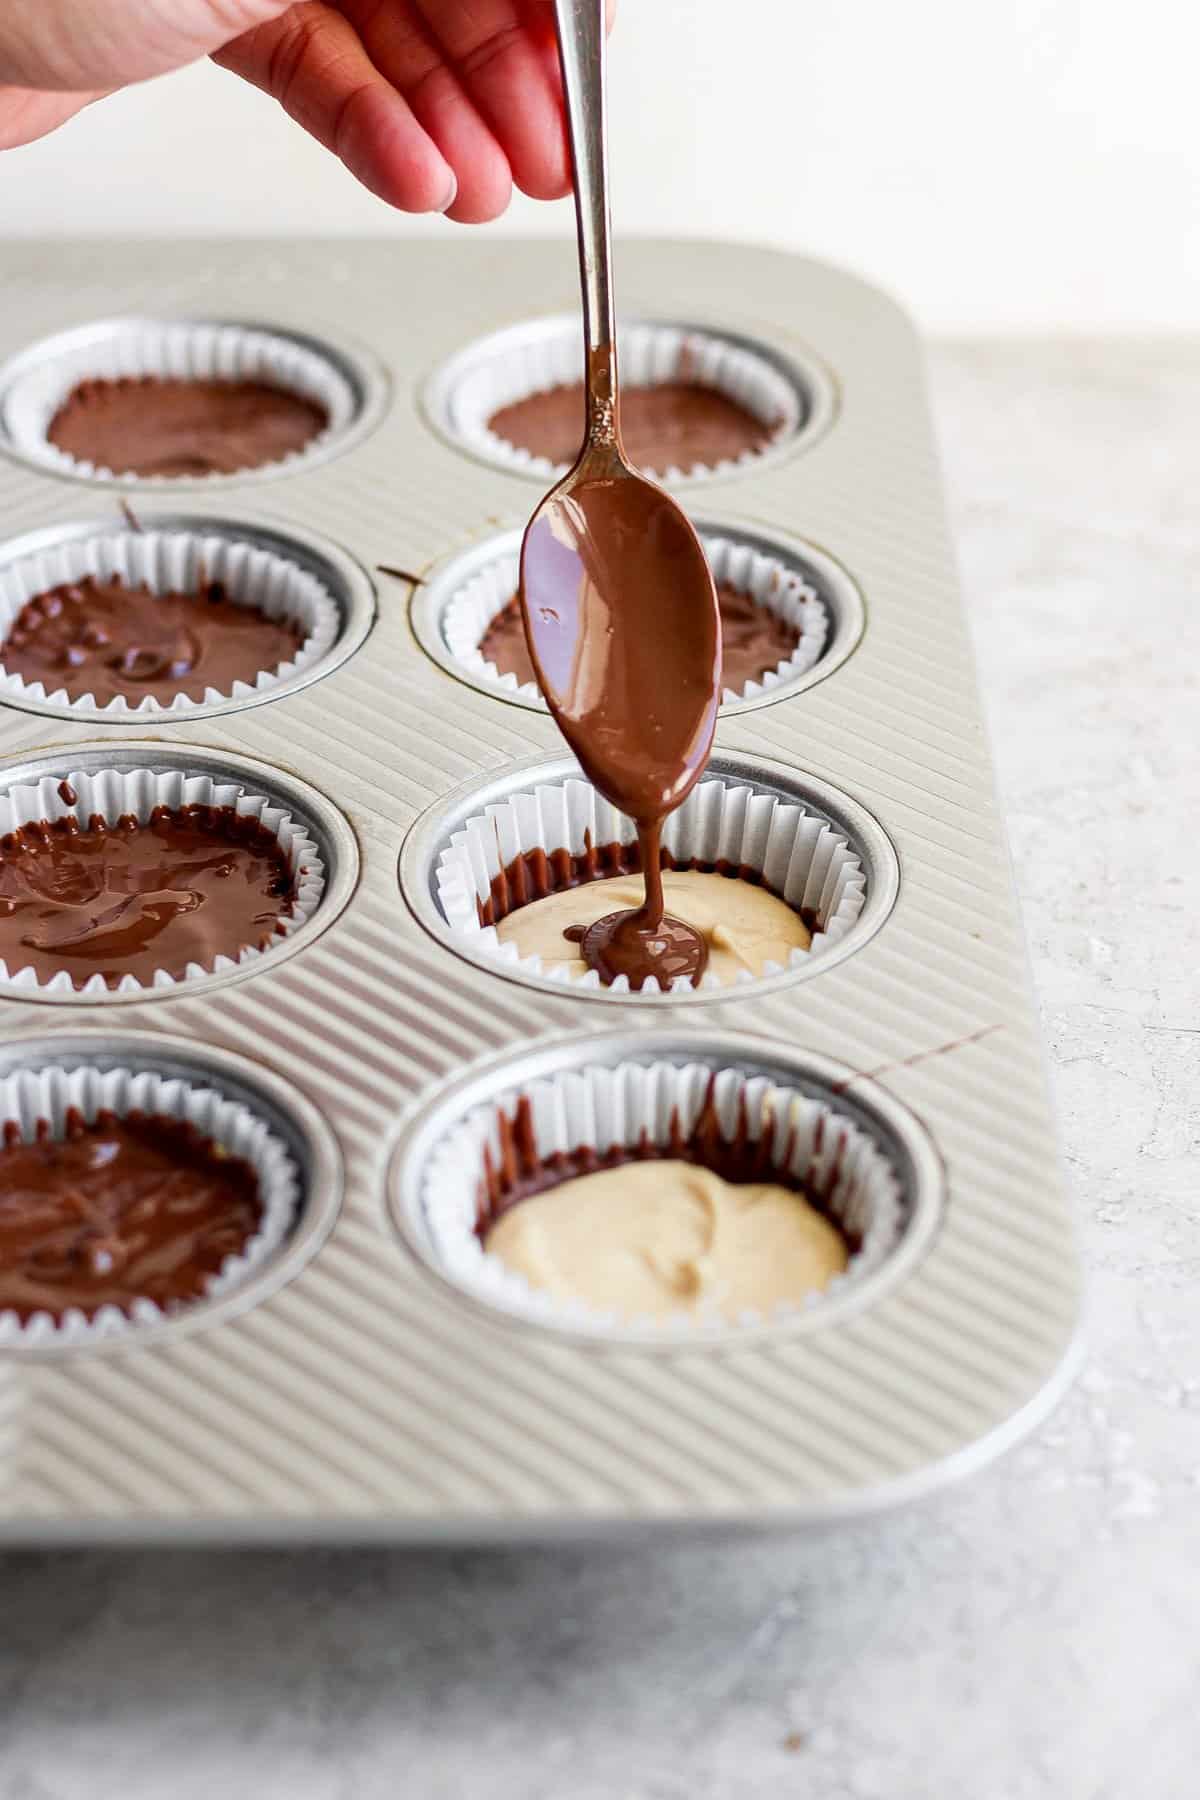 Drizzling chocolate over peanut butter in lined muffin cups using a spoon.